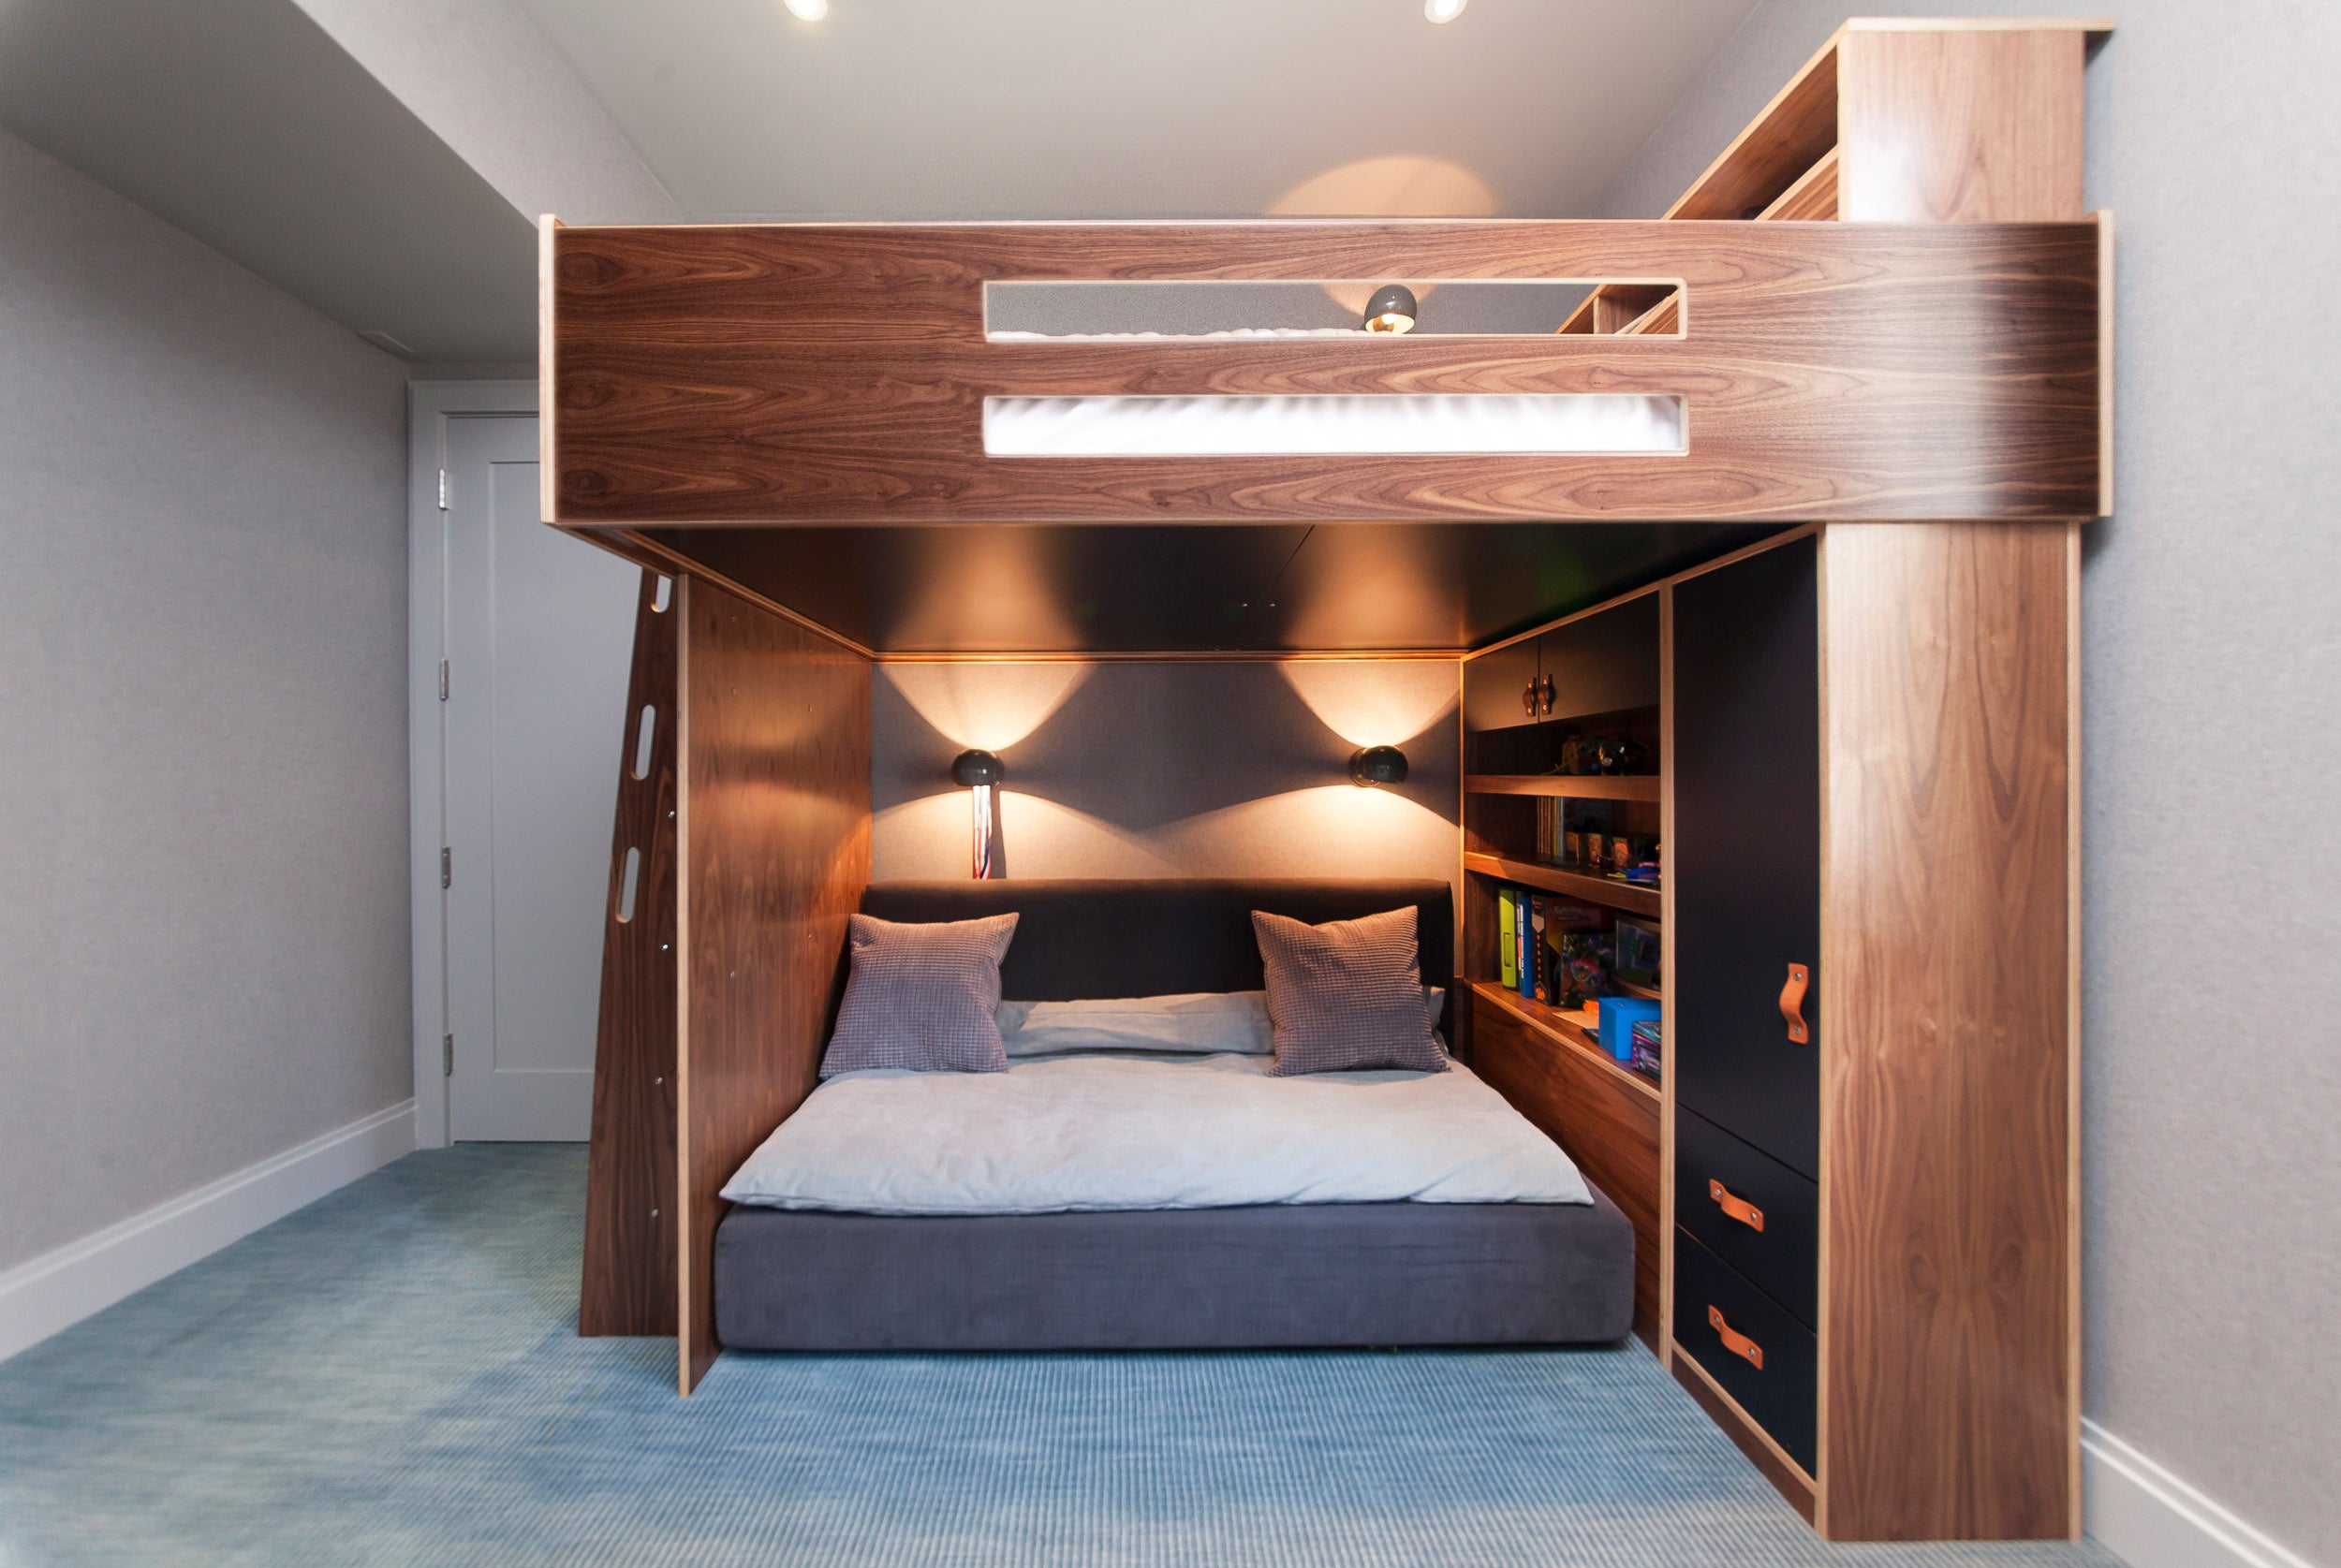 Stylish loft bed with under-bed lighting, built-in shelves, and rich wooden finish in a blue room.